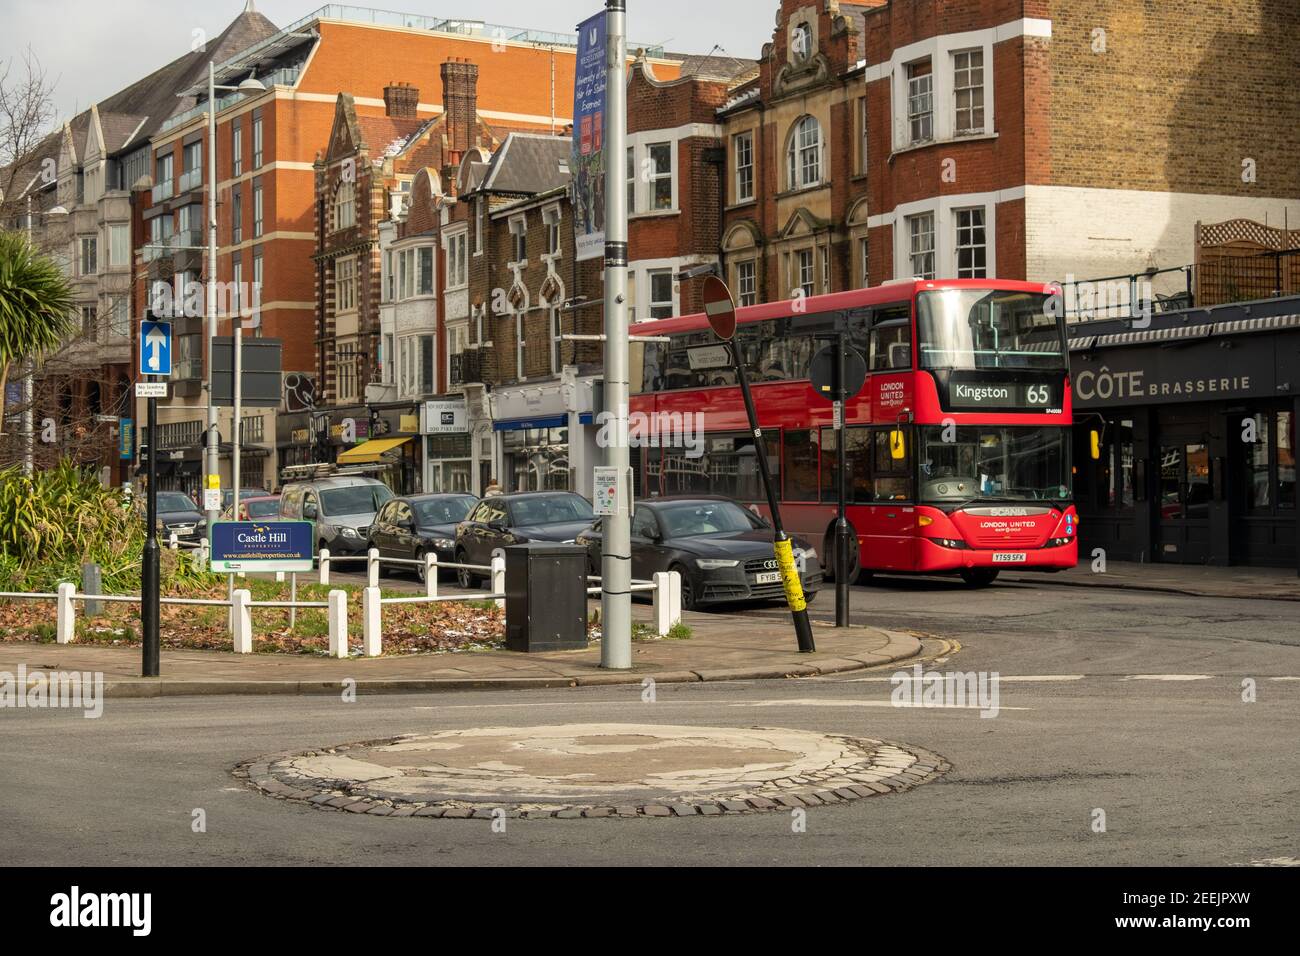 London- Small local independent shops on Ealing Green , Ealing Broadway in West London Stock Photo